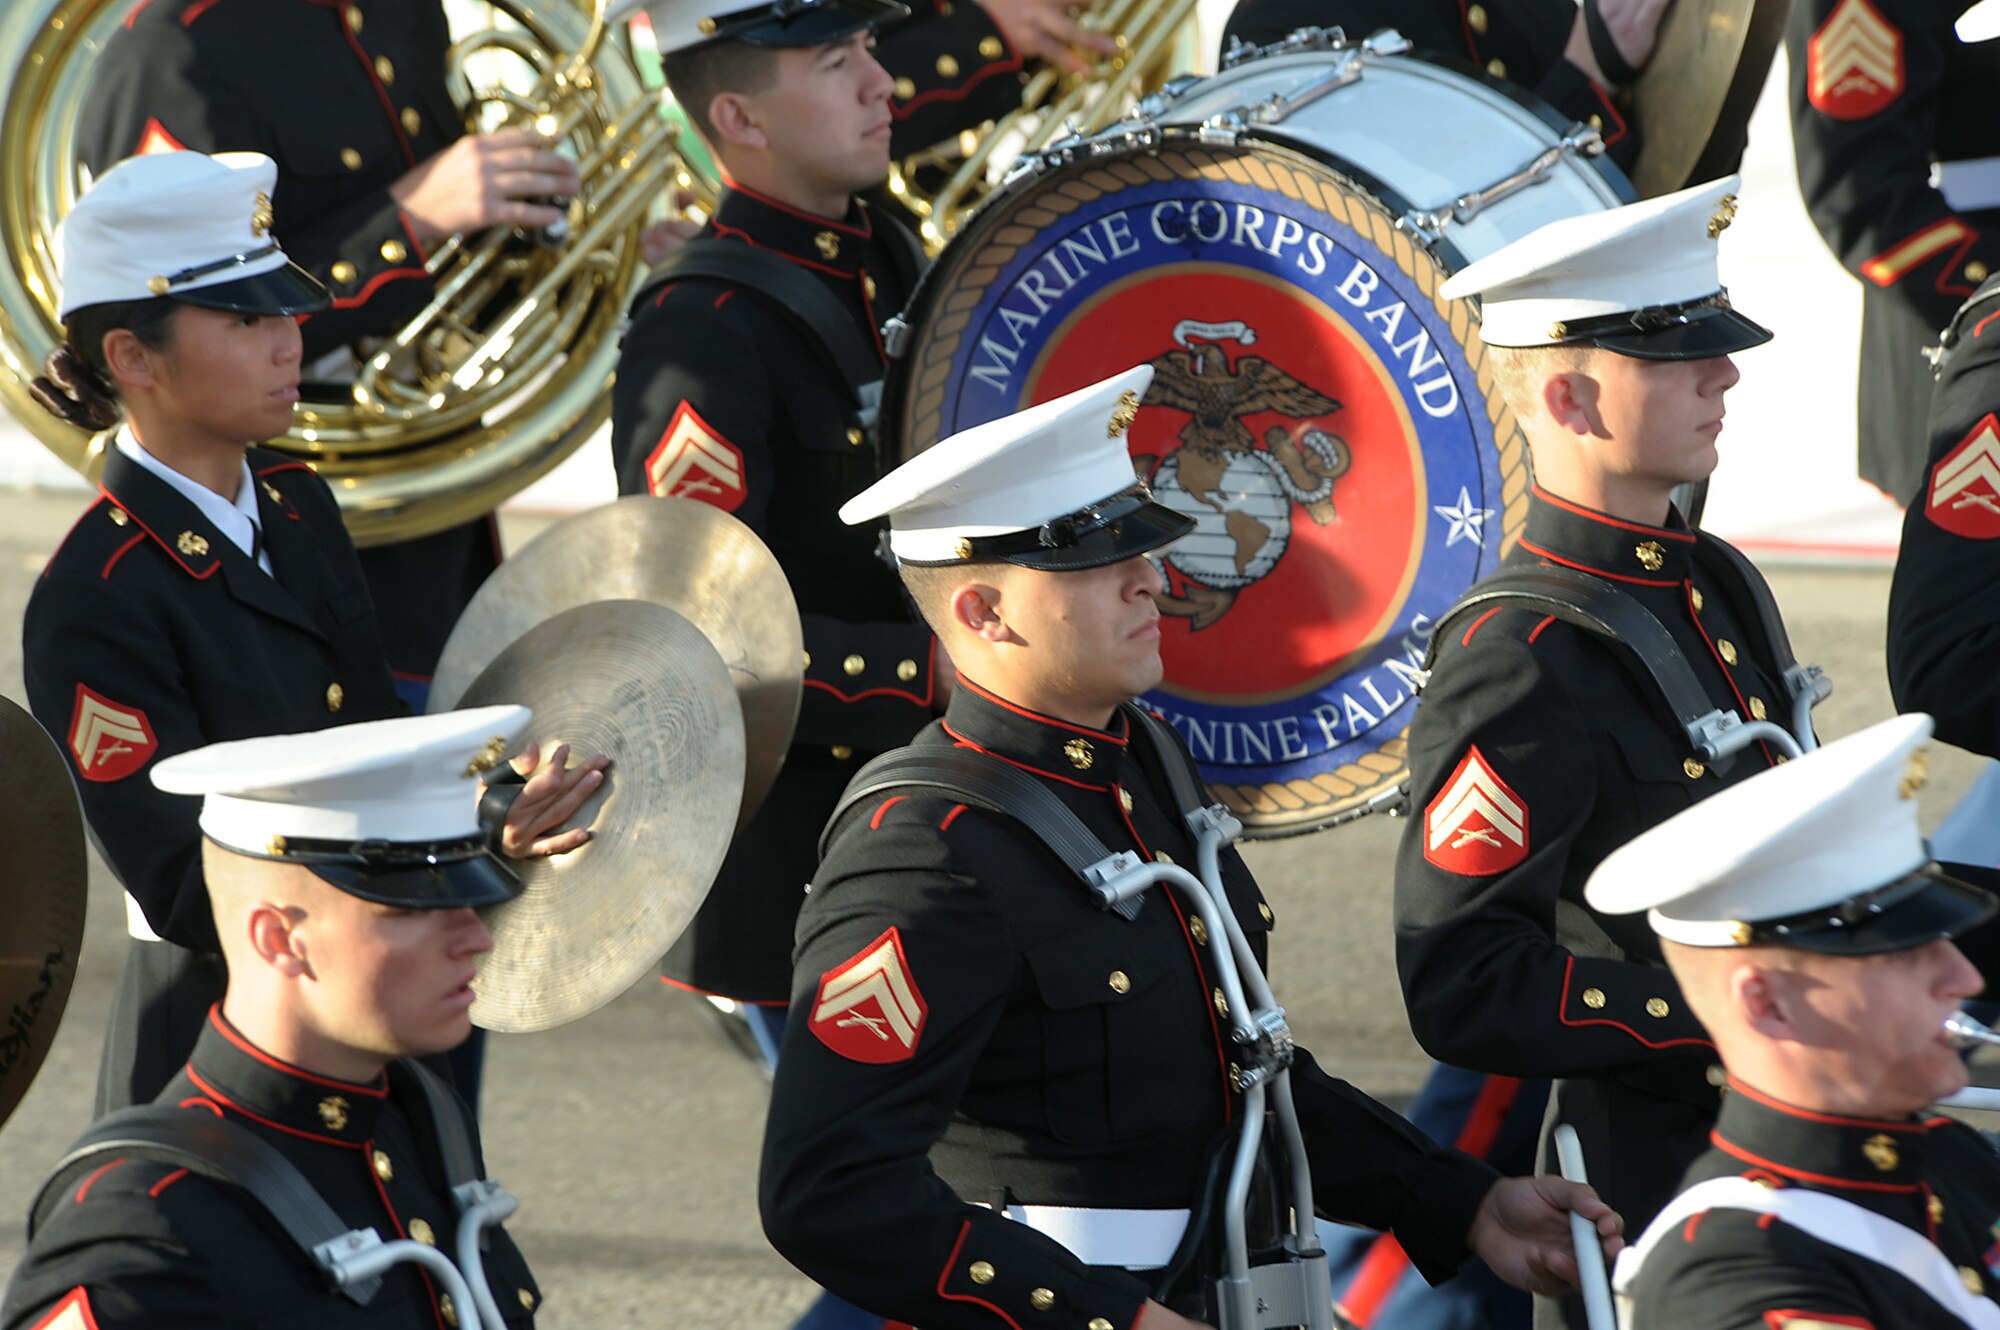 A Marine Corps band from Twenty-nine Palms, Calif., marches in the 2010 Pasadena Rose Parade, Jan 1.  (Photo by Atiba S. Copeland)